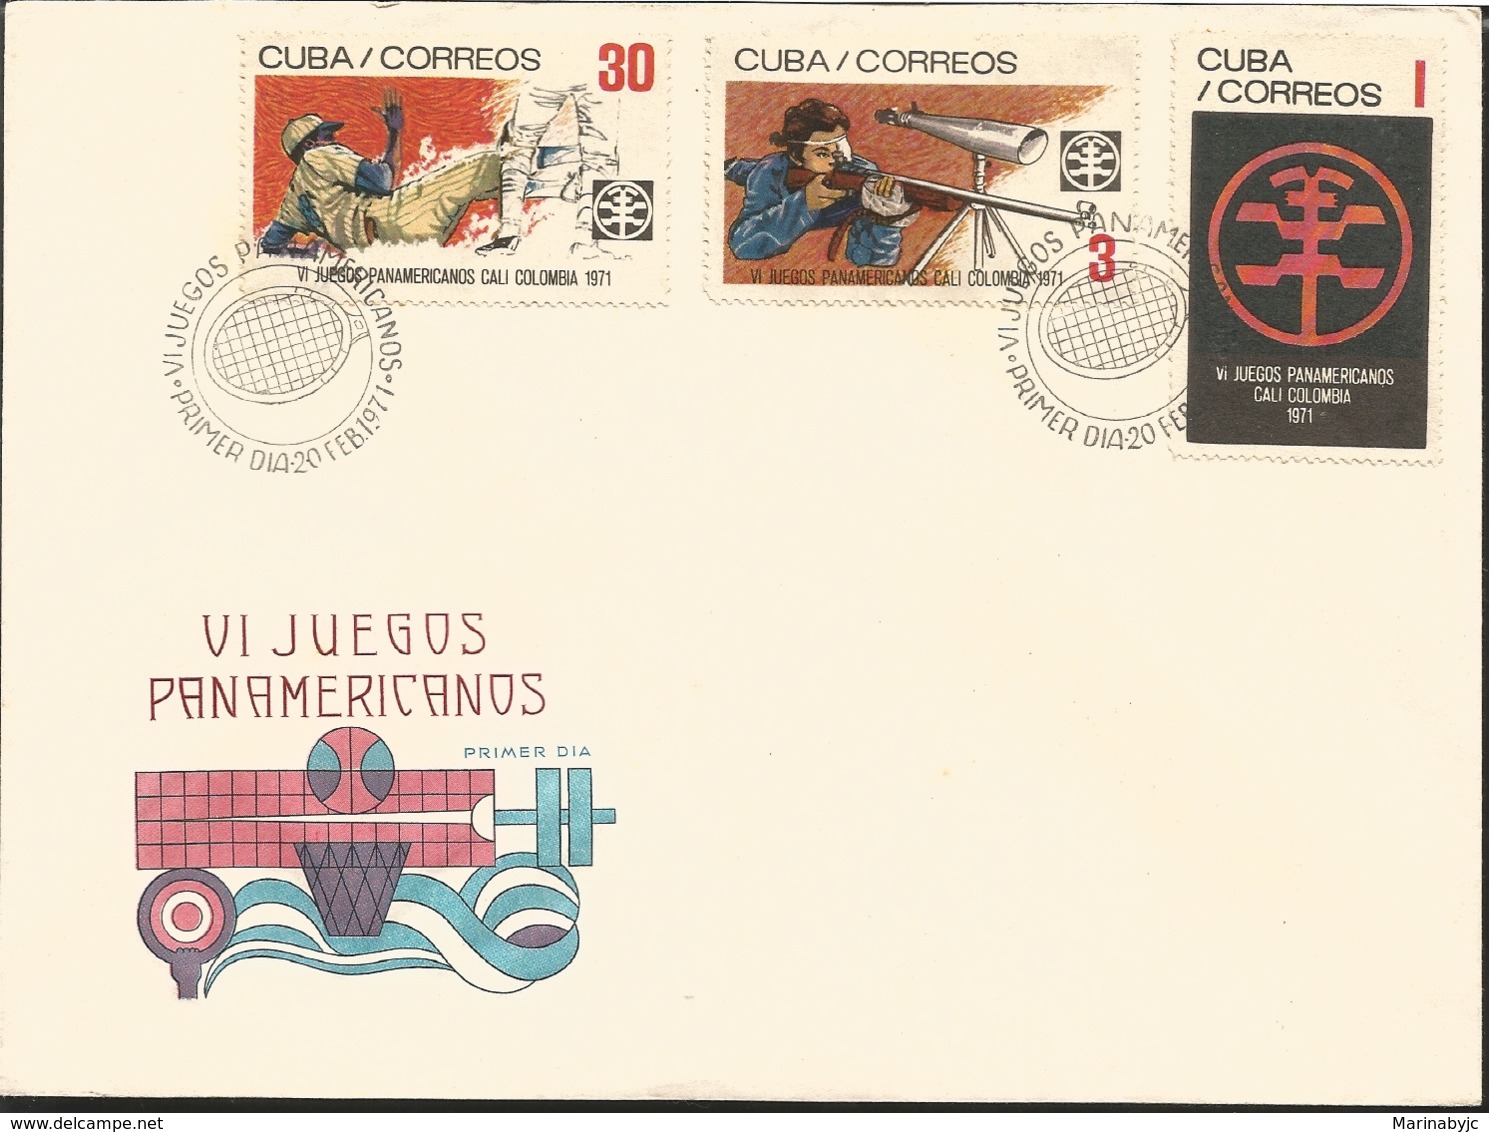 V) 1971 CARIBBEAN, 6TH PAN AMERICAN GAMES, CALI, COLOMBIA, BASEBALL, RIFLE SHOOTING, EMBLEM, WITH SLOGAN CANCELATION IN - Covers & Documents